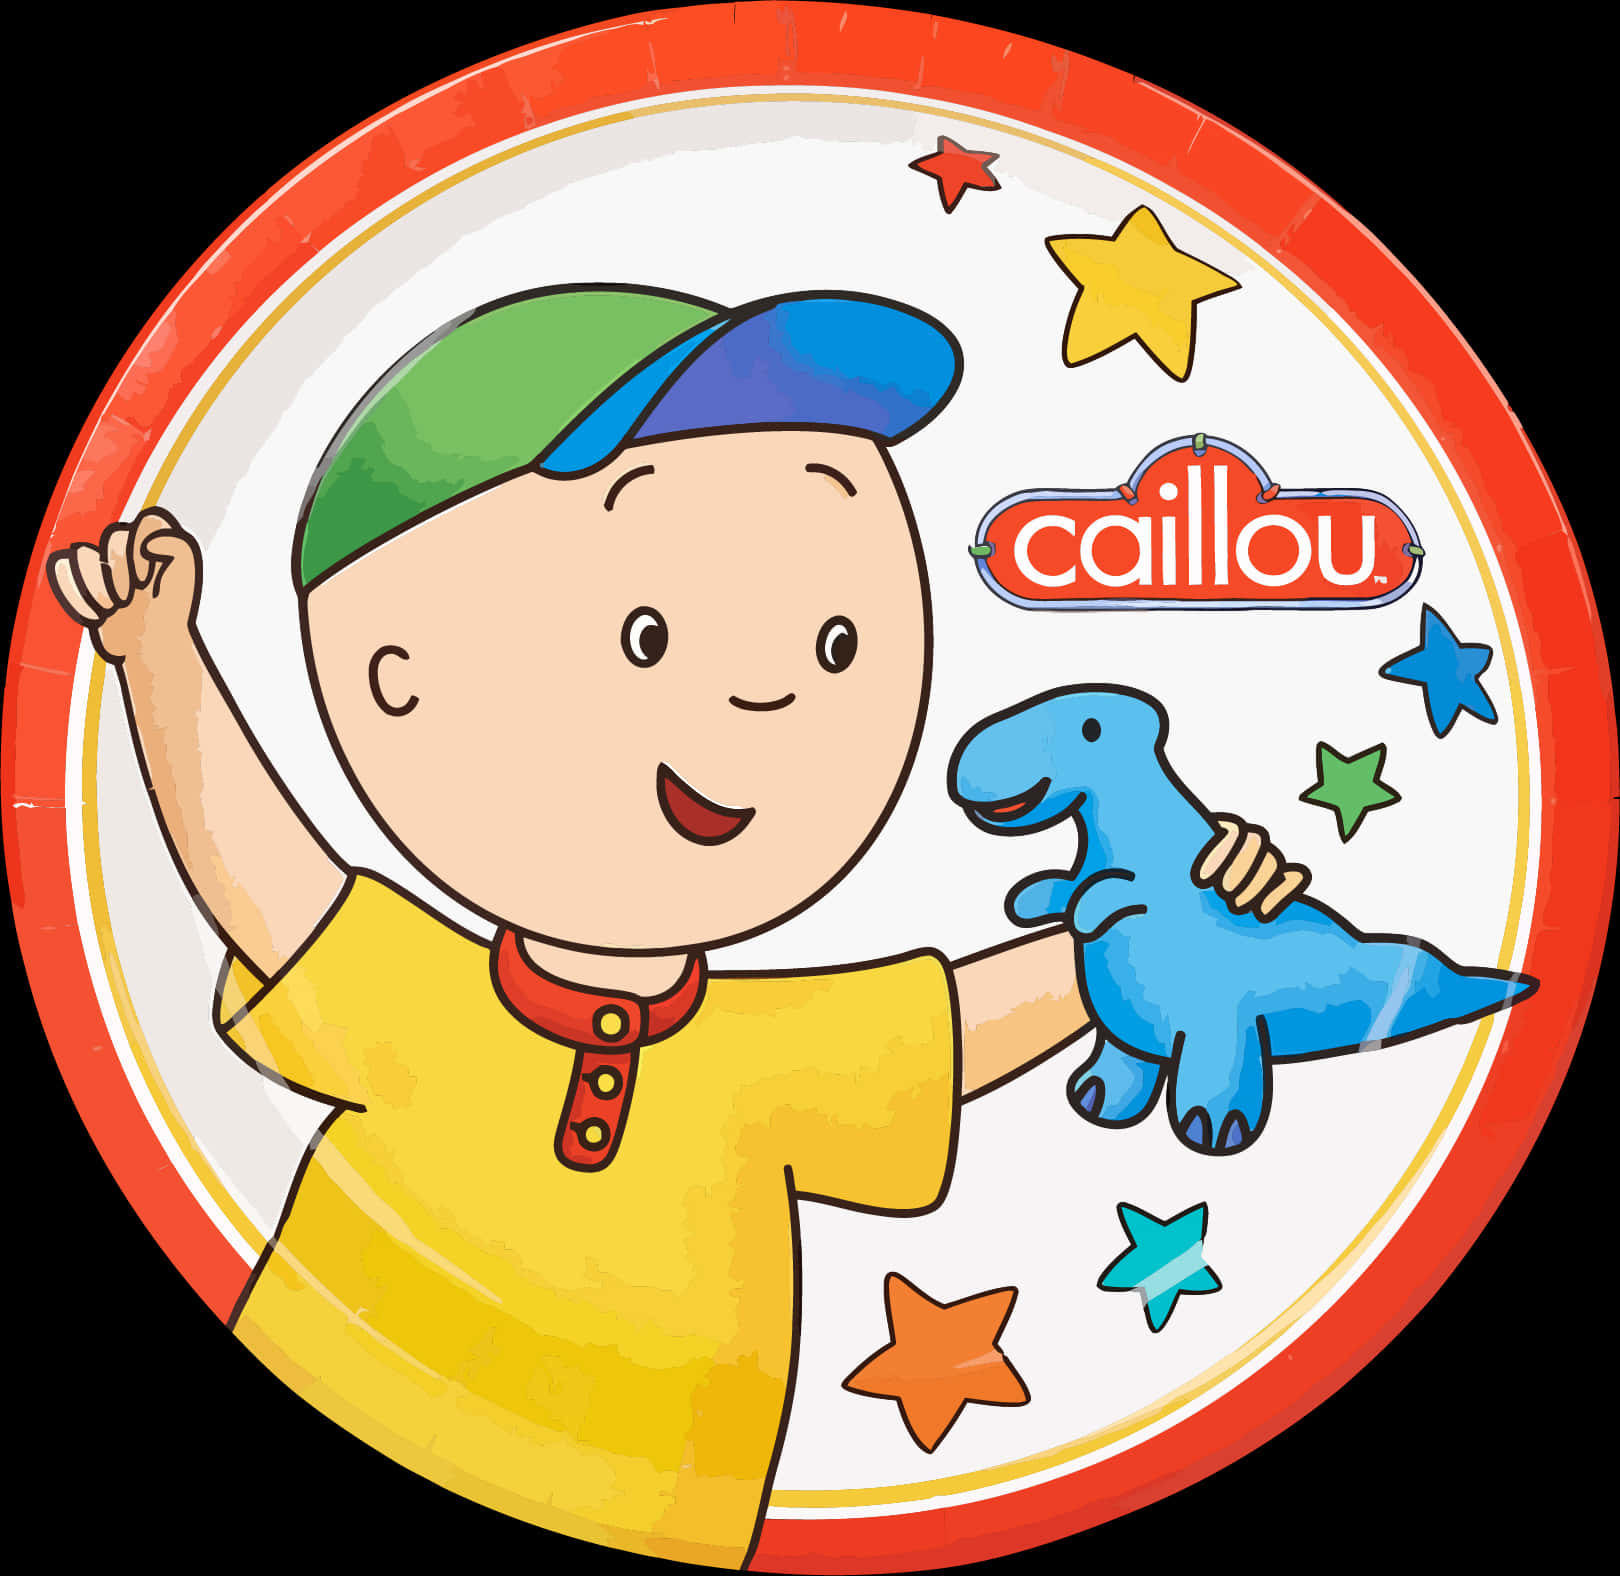 Caillou Animated Character Plate Design